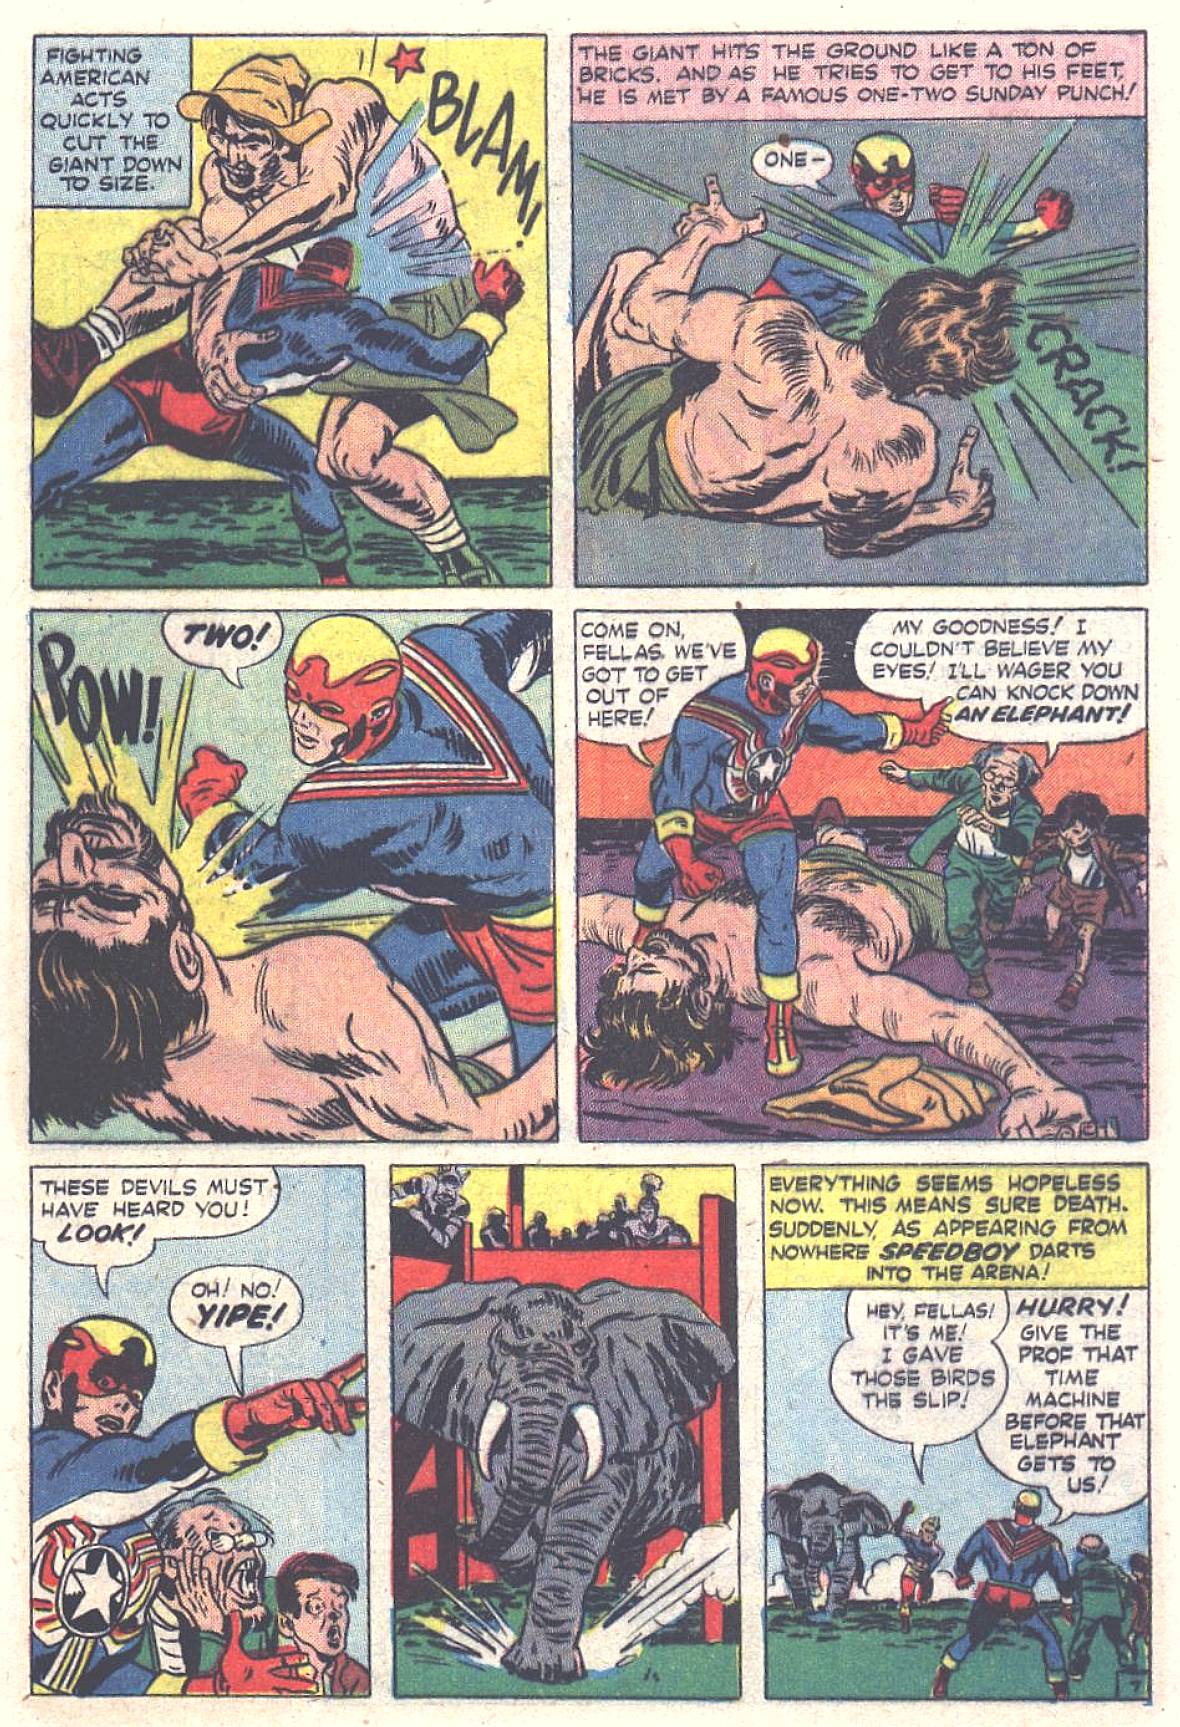 Read online Fighting American (1954) comic -  Issue #5 - 19